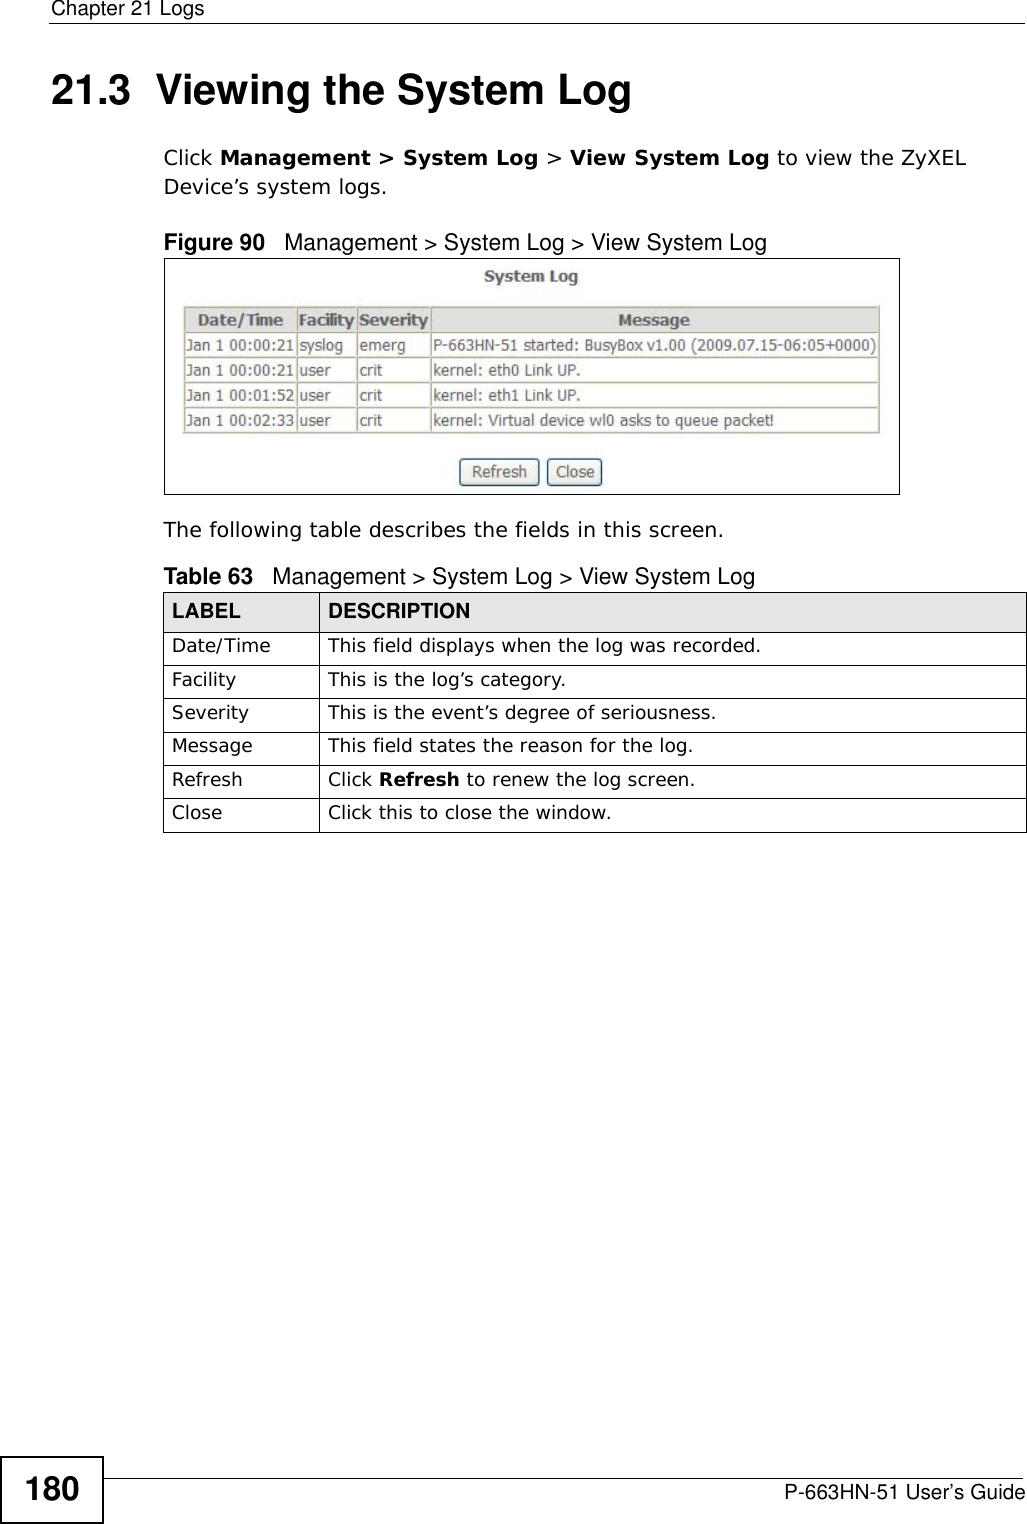 Chapter 21 LogsP-663HN-51 User’s Guide18021.3  Viewing the System LogClick Management &gt; System Log &gt; View System Log to view the ZyXEL Device’s system logs.Figure 90   Management &gt; System Log &gt; View System LogThe following table describes the fields in this screen.  Table 63   Management &gt; System Log &gt; View System LogLABEL DESCRIPTIONDate/Time  This field displays when the log was recorded. Facility This is the log’s category.Severity This is the event’s degree of seriousness.Message This field states the reason for the log.Refresh Click Refresh to renew the log screen. Close Click this to close the window.